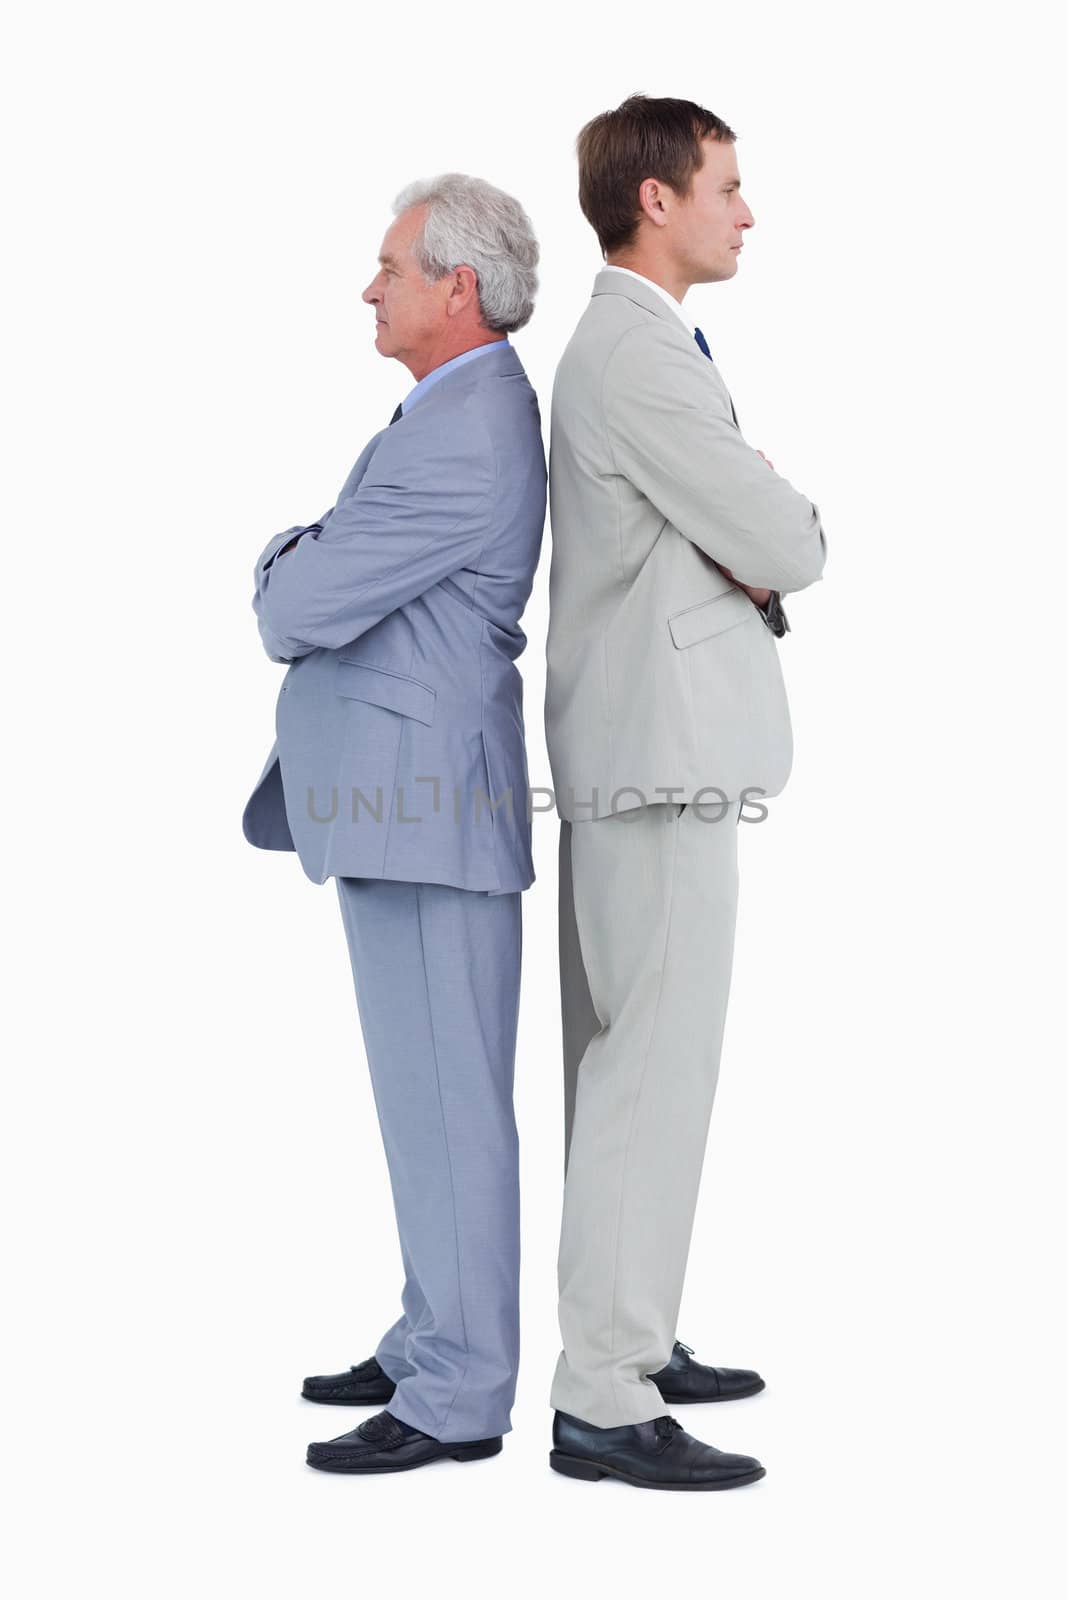 Side view of serious tradesmen standing back to back against a white background